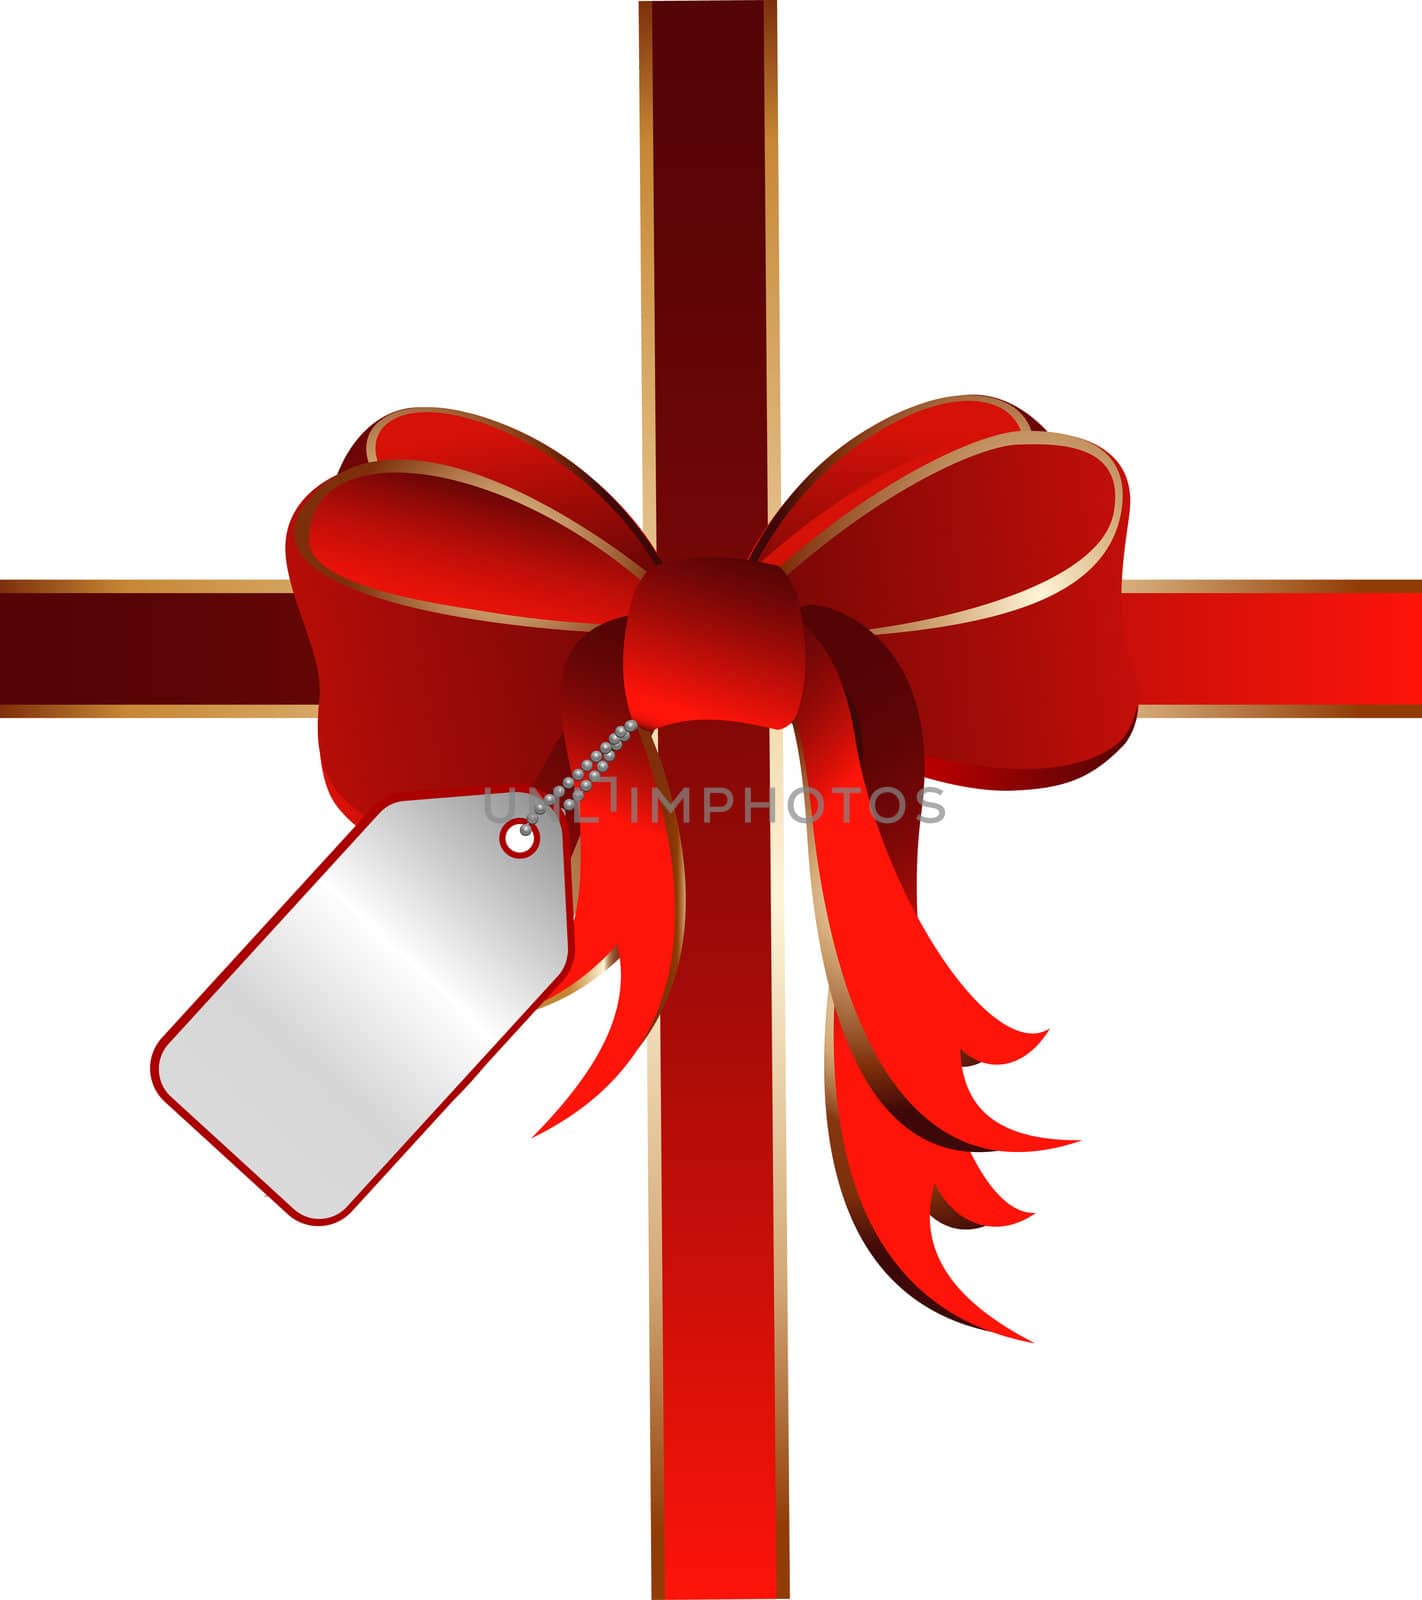  red ribbon with card tag by peromarketing